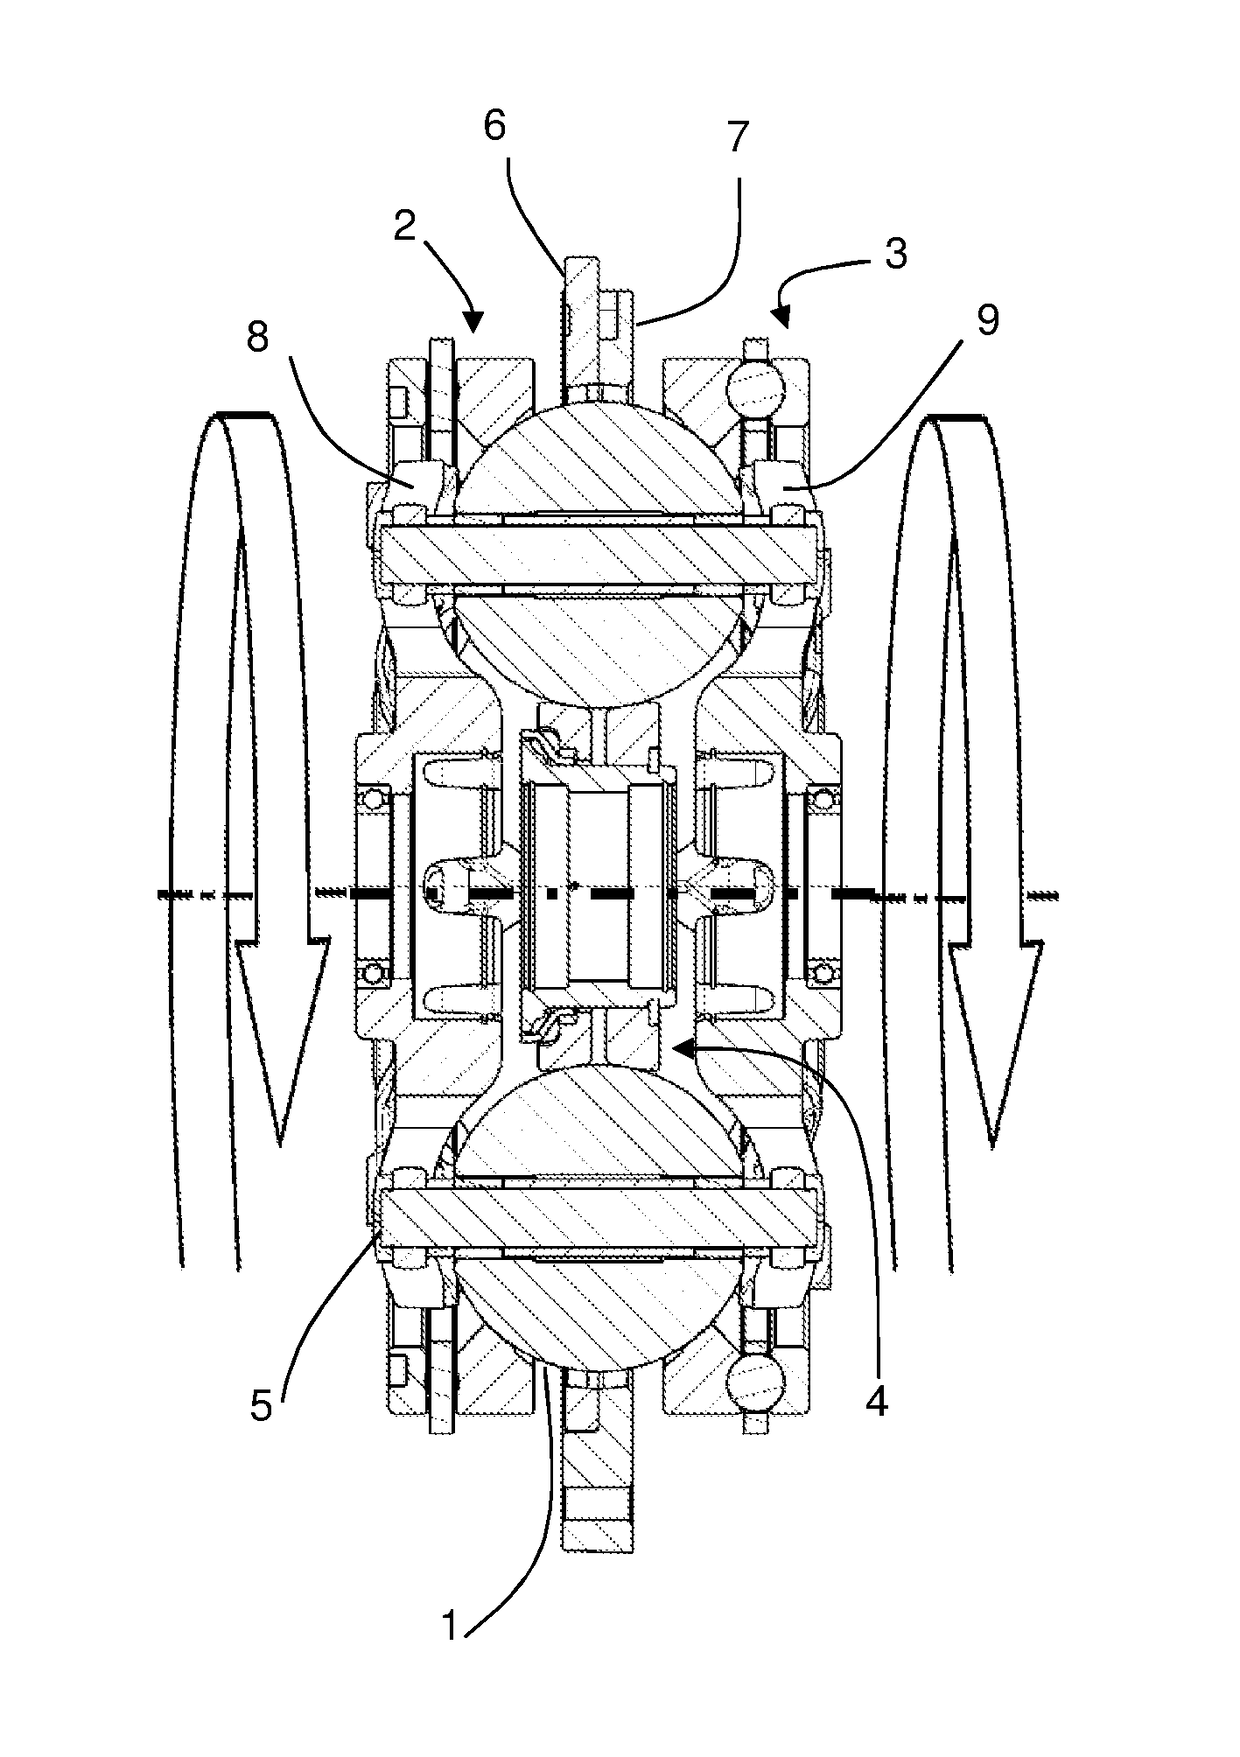 Abuse mode torque limiting control method for a ball-type continuously variable transmission